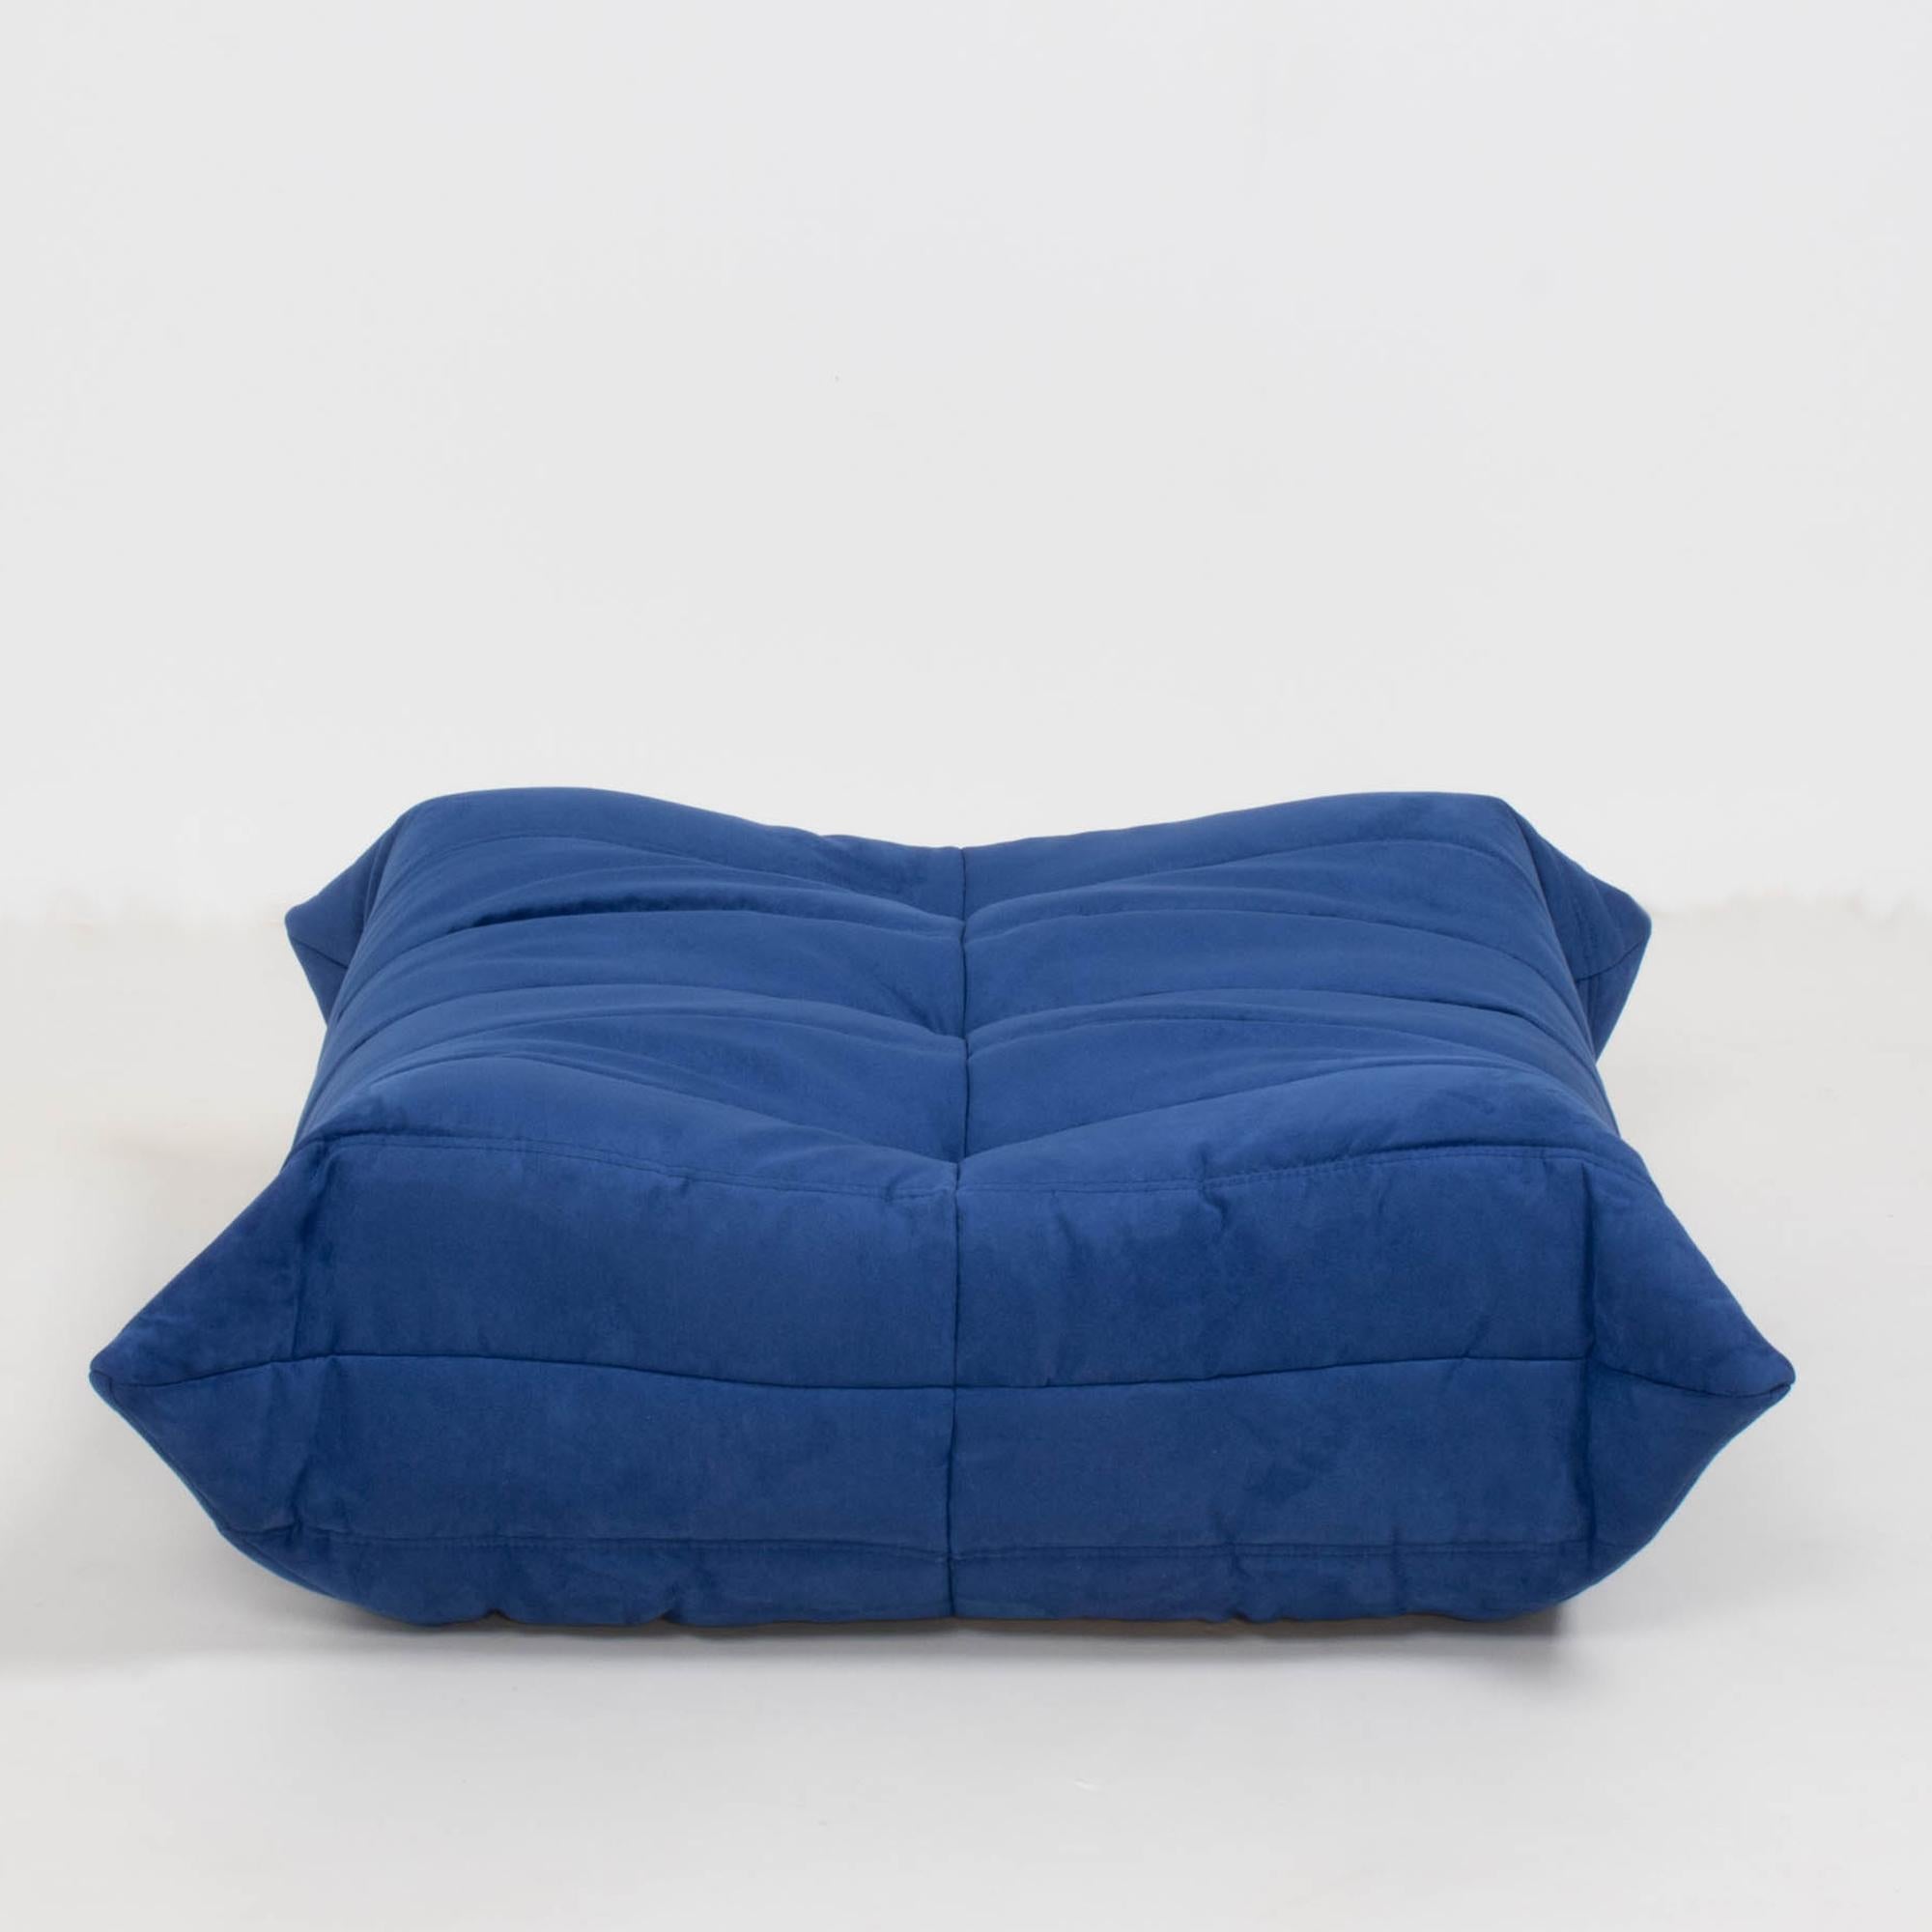 Late 20th Century Ligne Roset Togo Blue Armchair and Footstool by Michel Ducaroy, Set of 2